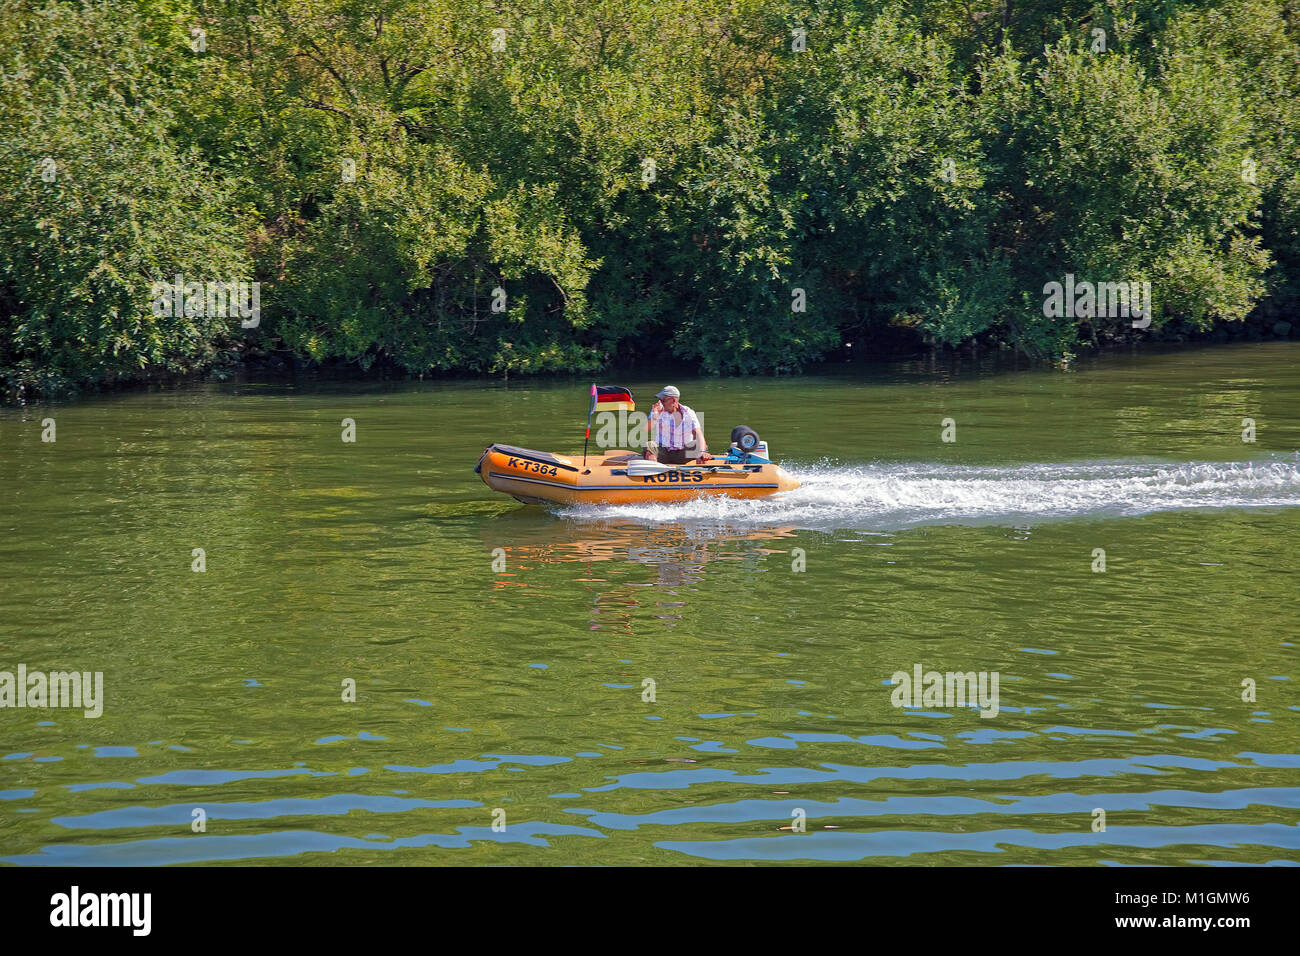 Leisure captain with inflatable boat on Moselle river, Loesnich, Rhineland-Palatinate, Germany, Europe Stock Photo